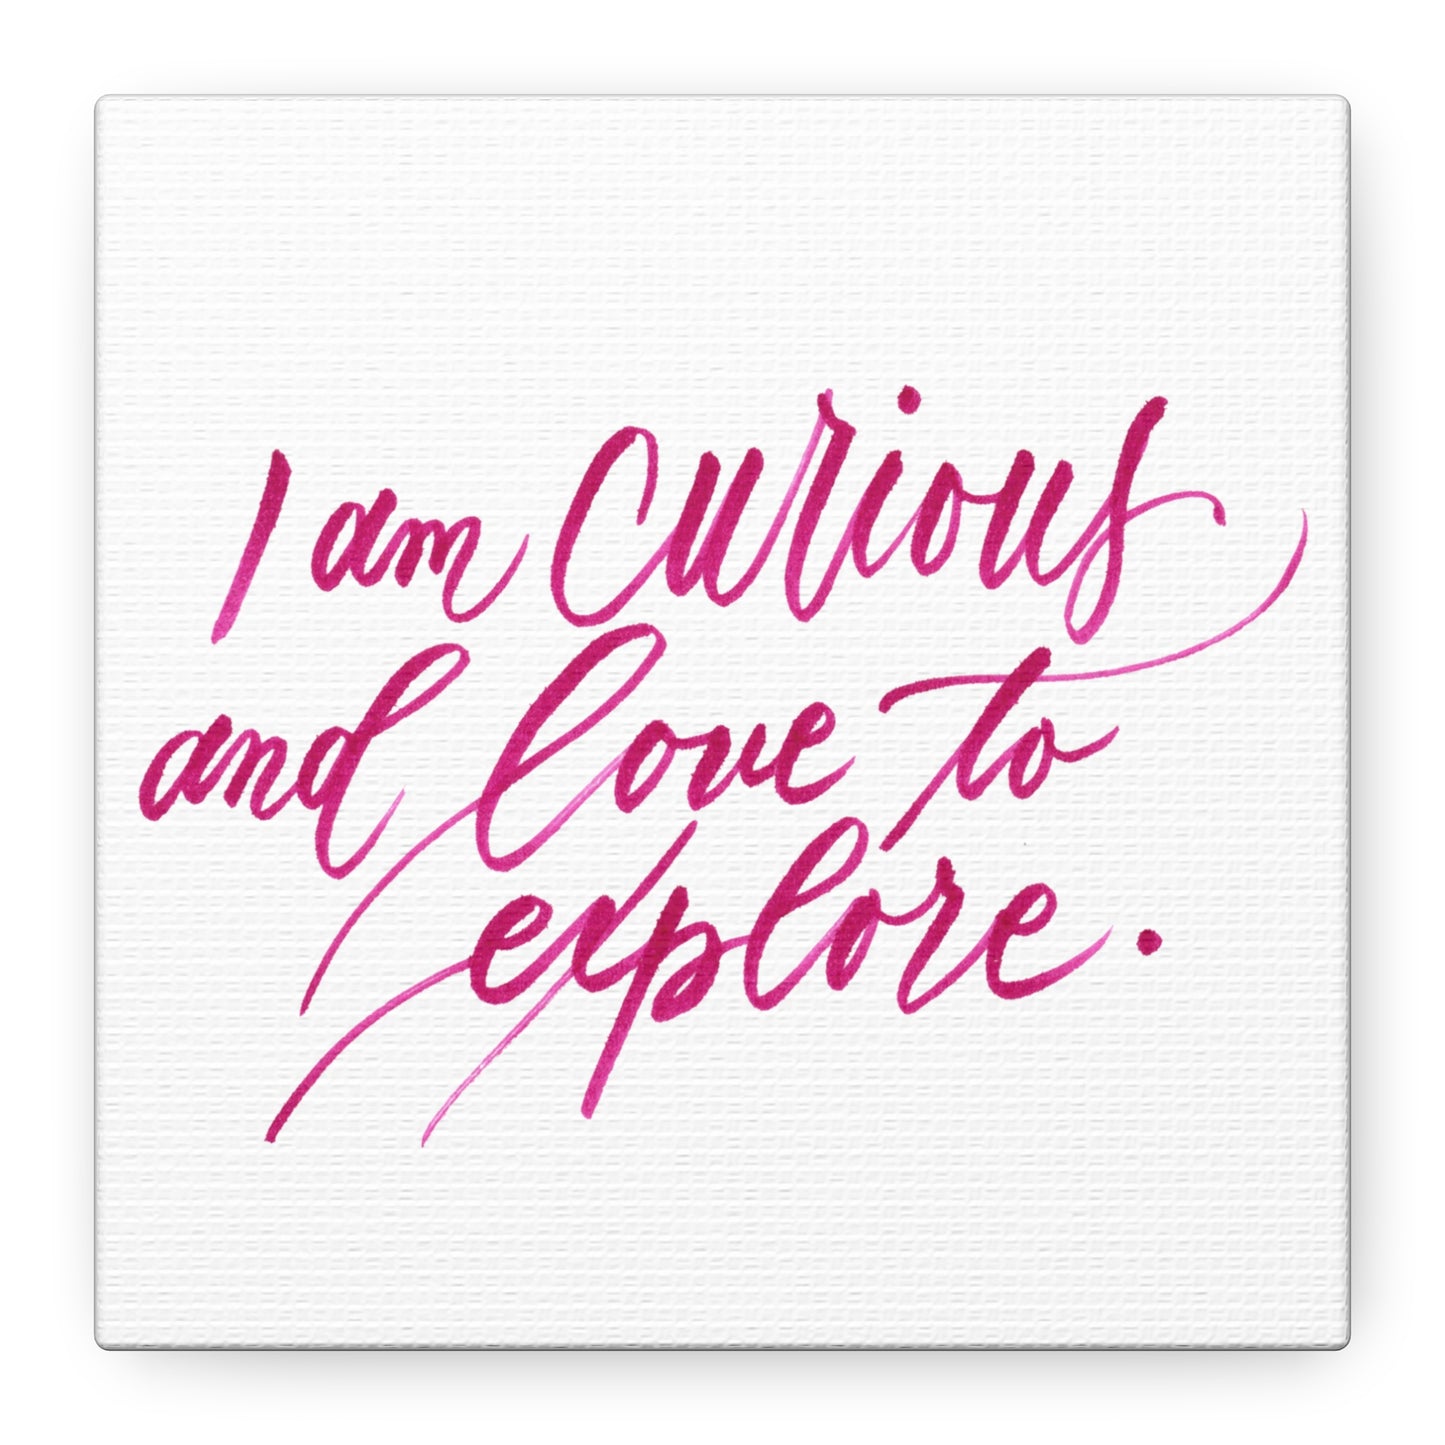 Mini 6"x6" Thick 1.25" Wall Decor Canvas - "I am curious..." Handwritten Calligraphy Printed on Matte Canvas, Stretched, 1.25" - I am Empowered #02